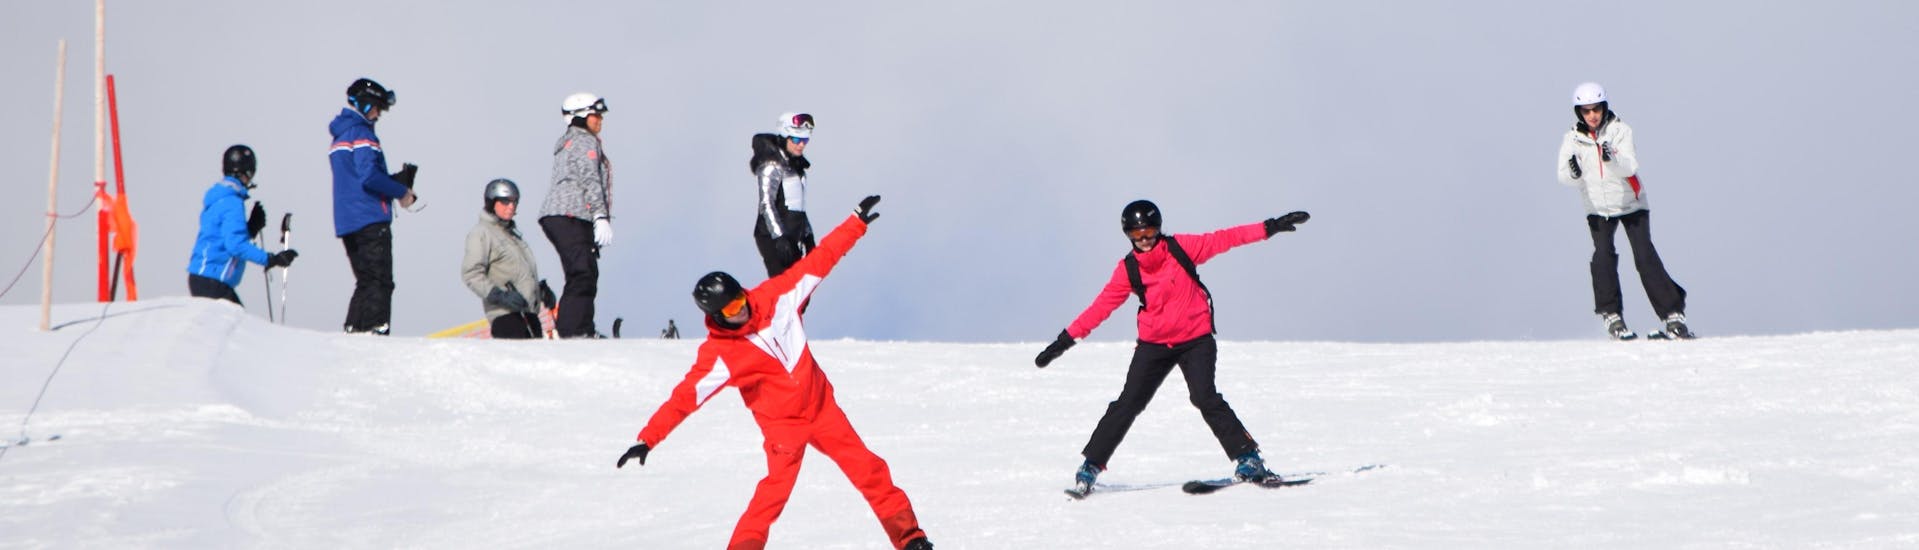 Teen &amp; Adult Ski Lessons for First Timers &amp; Beginners with Ski School Snowsports Westendorf - Hero image